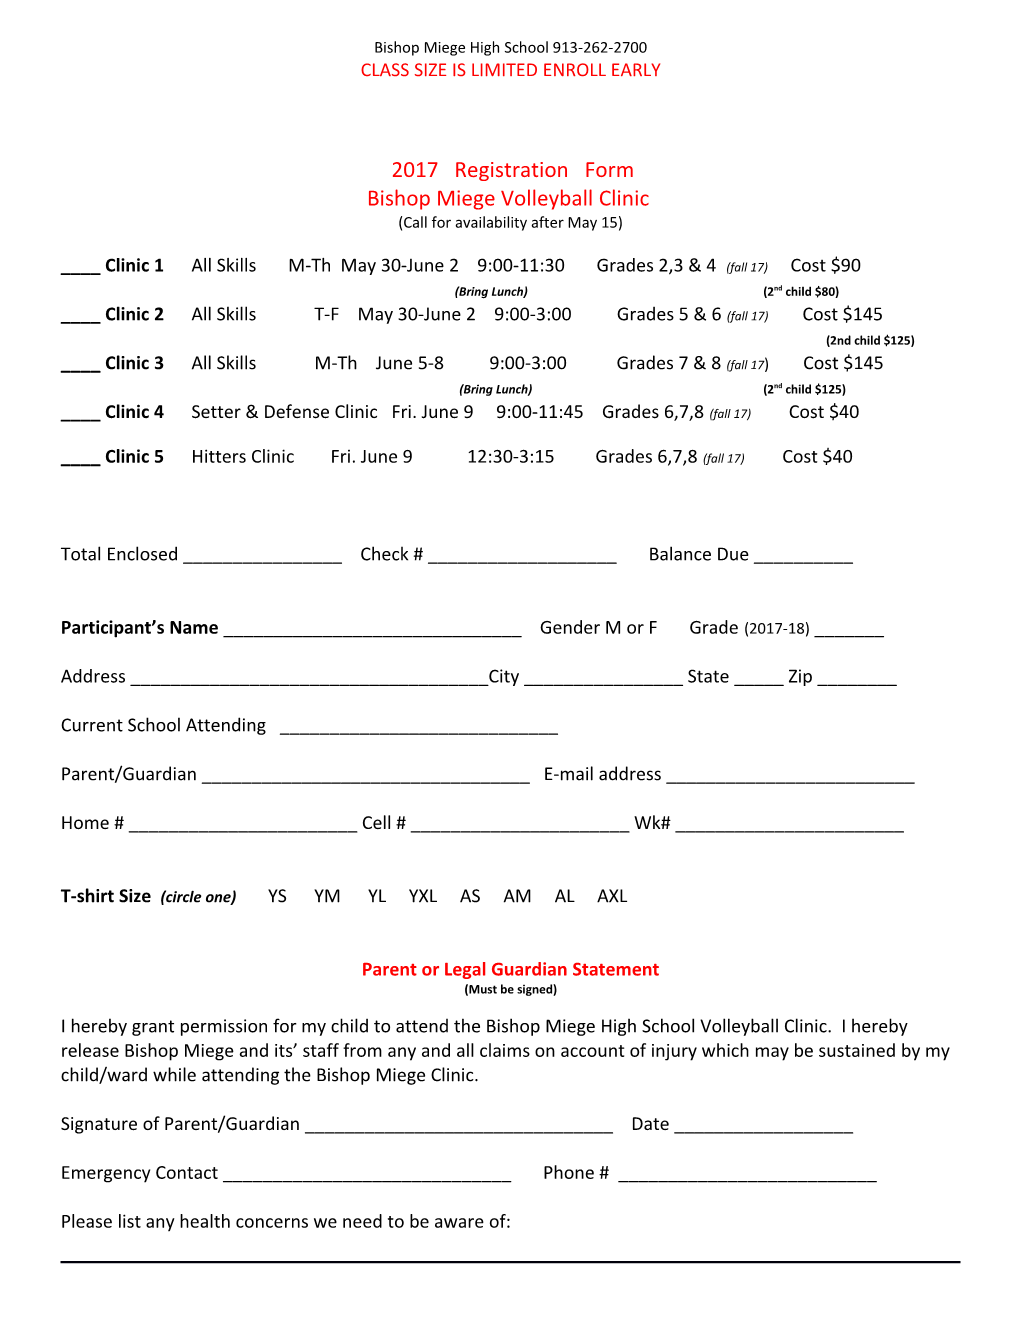 Bishop Miege Volleyball Clinics